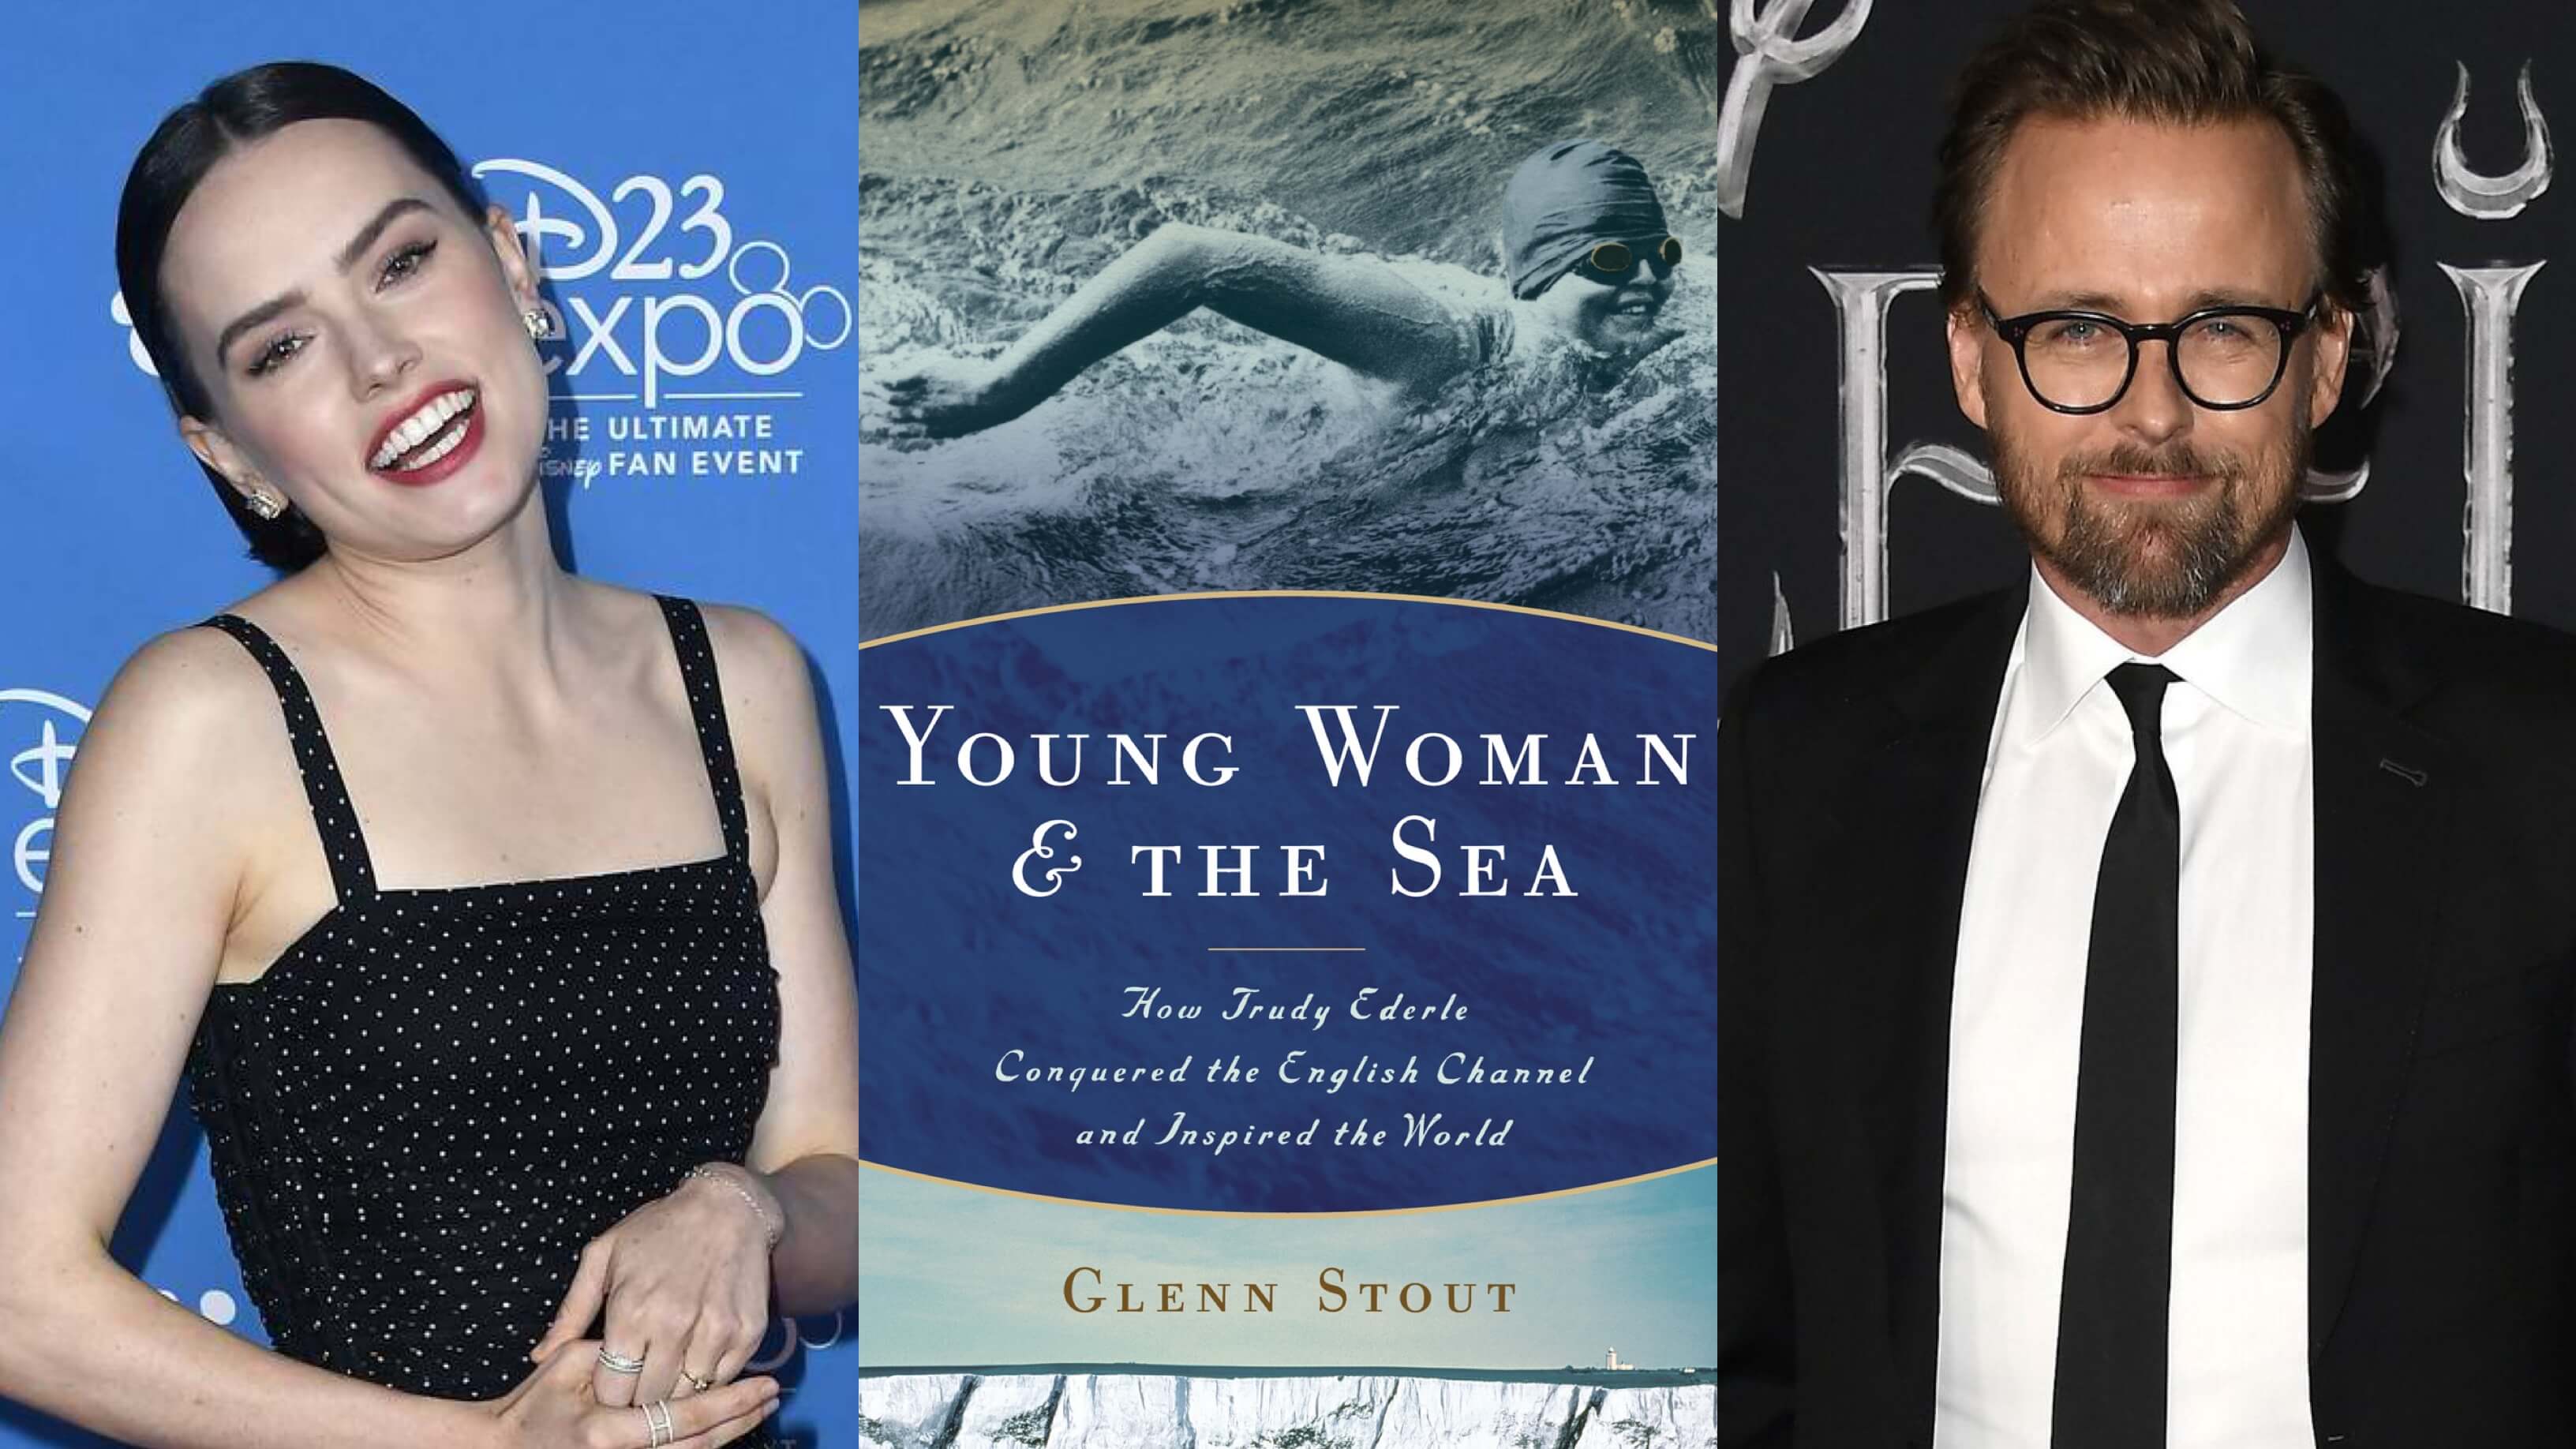 Disney+ Developing Film ‘Young Woman and The Sea’ With Daisy Ridley to Star and Joachim Rønning to Direct